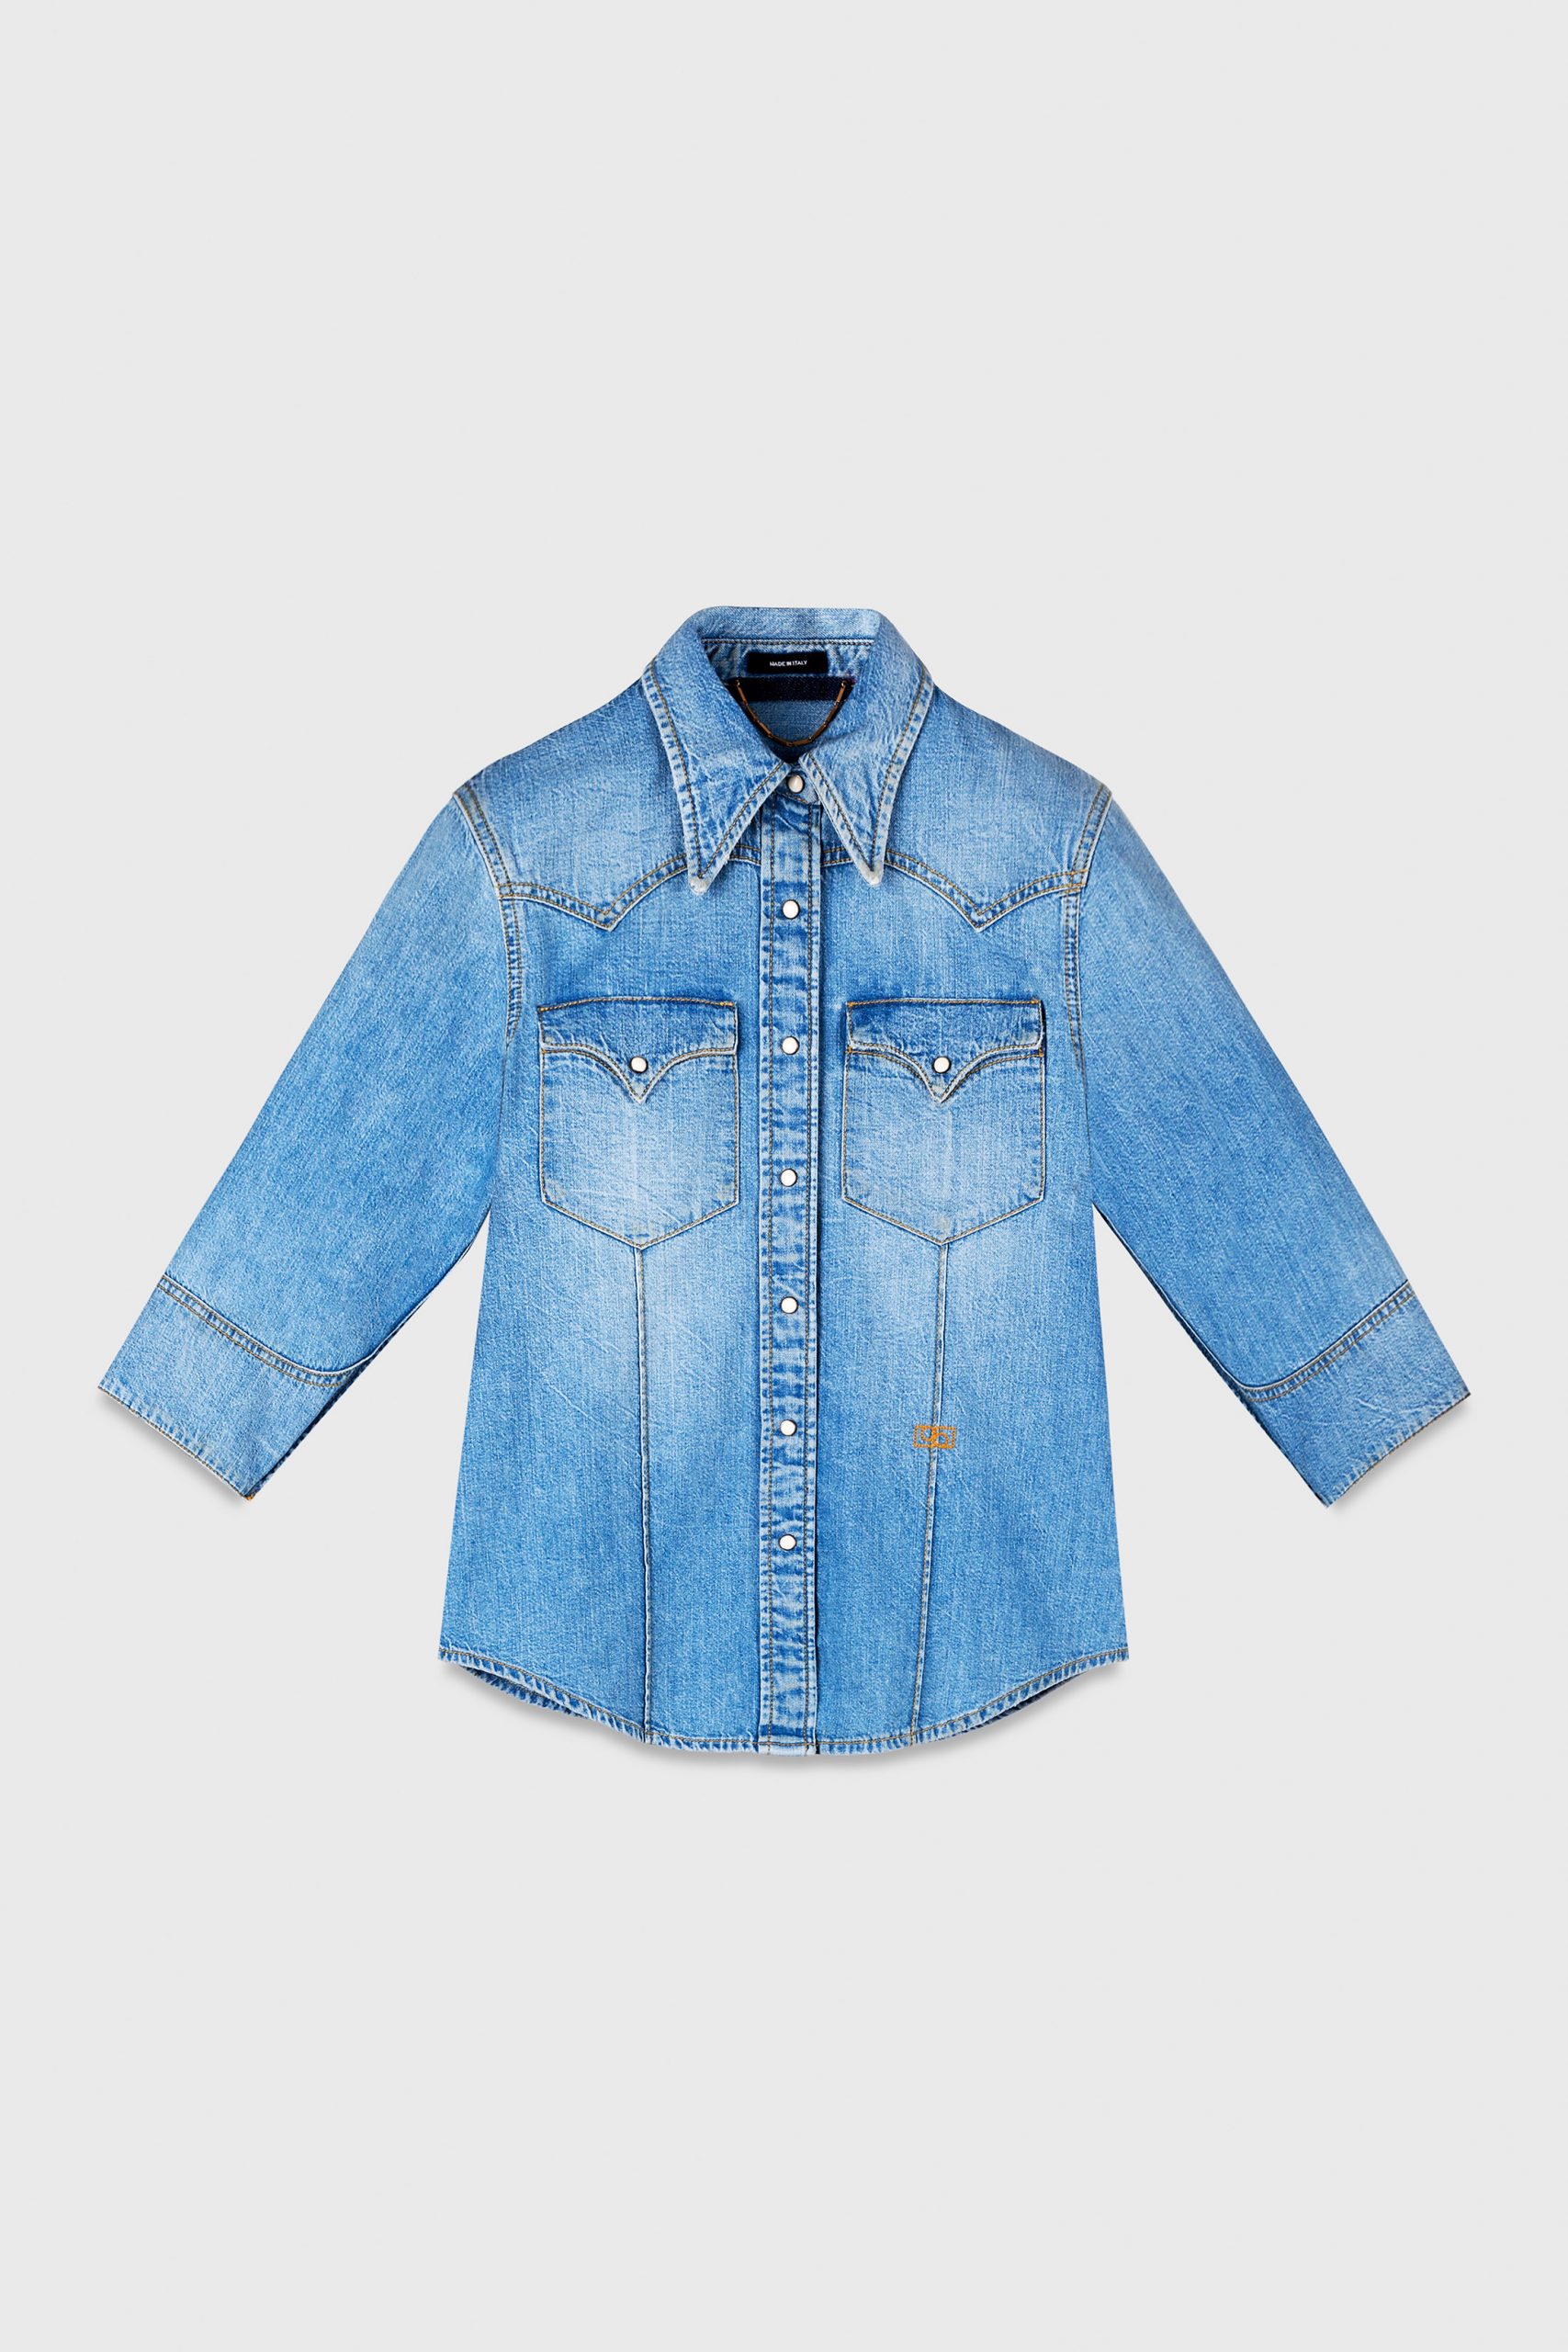 Ports 1961 teams with R13 on denim capsule collection | The Impression